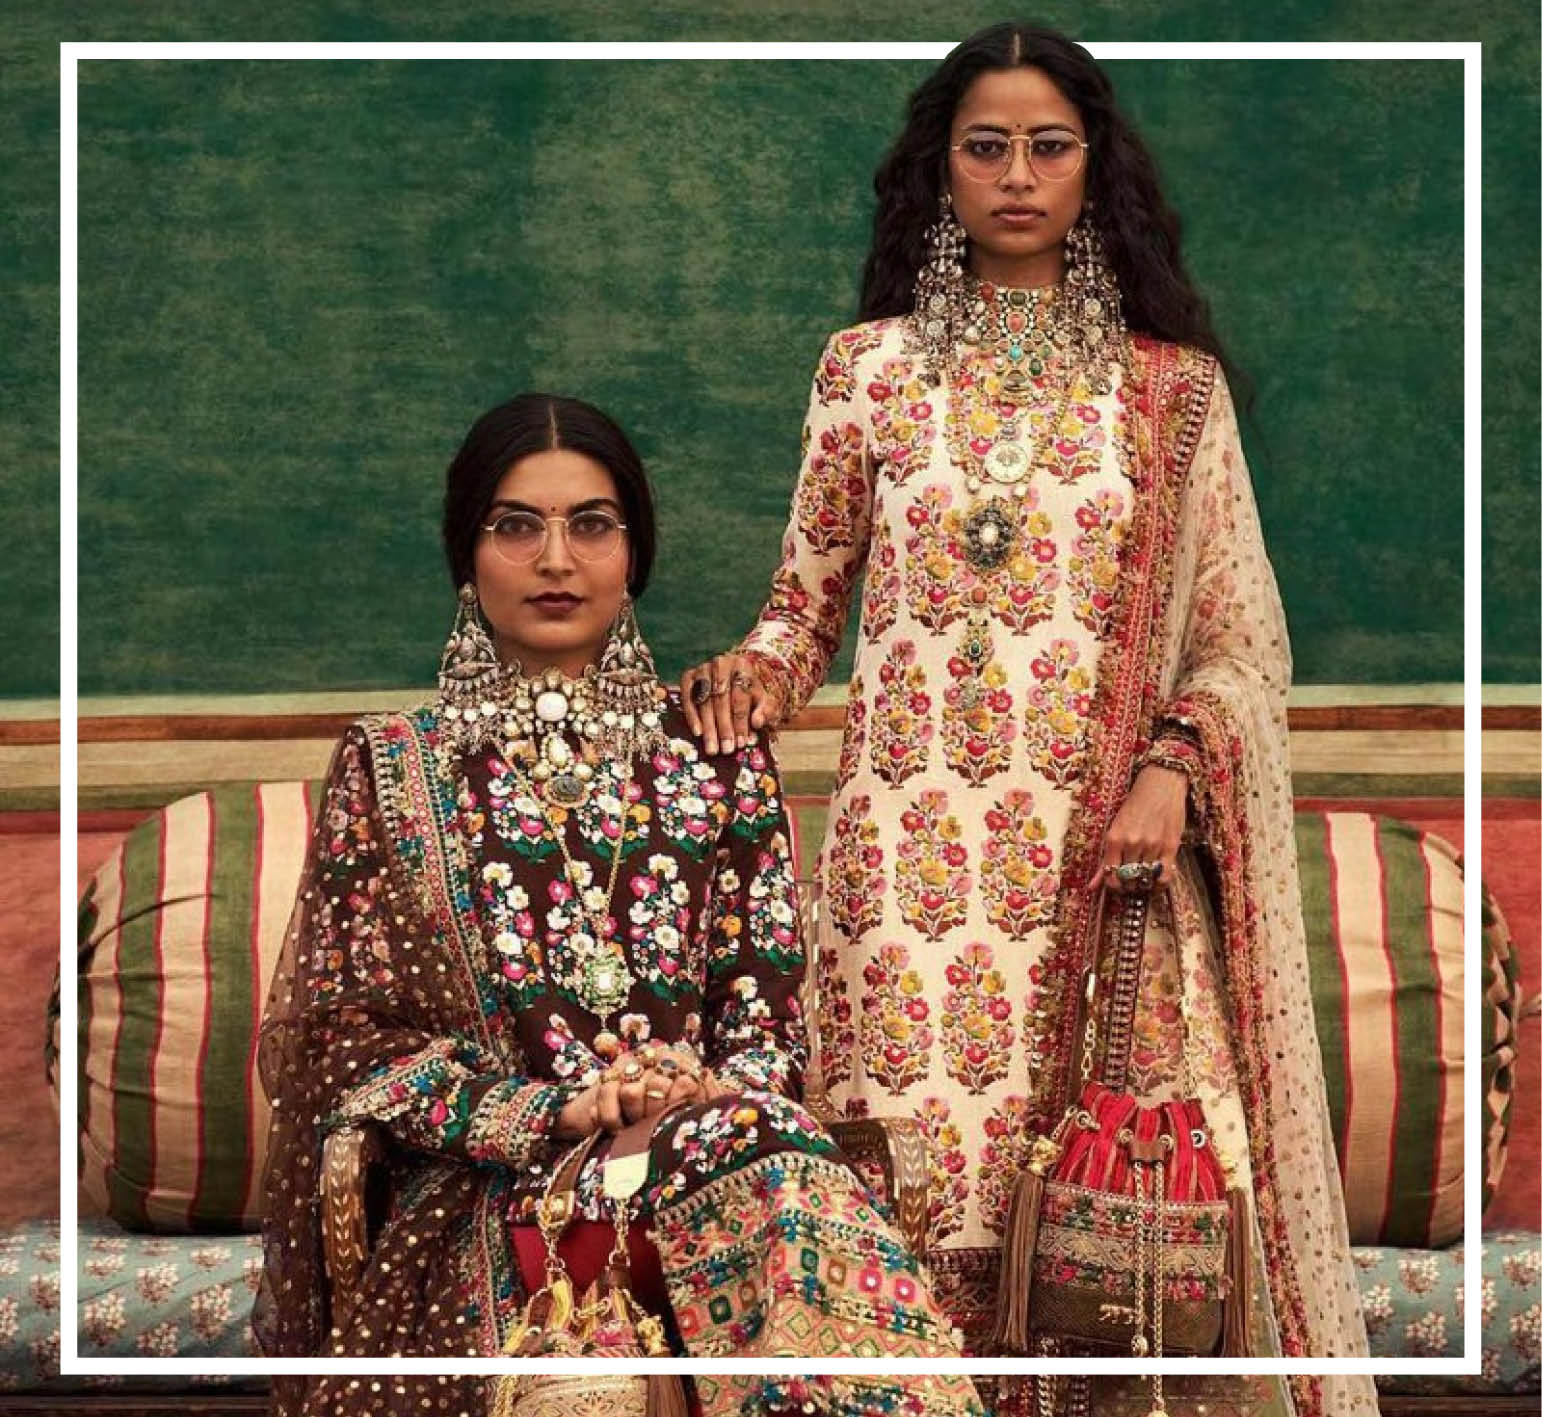 How to build your bridal trousseau with designer brands for saris, lehengas  and more, Vogue Wedding Show - The Virtual Edit 2021